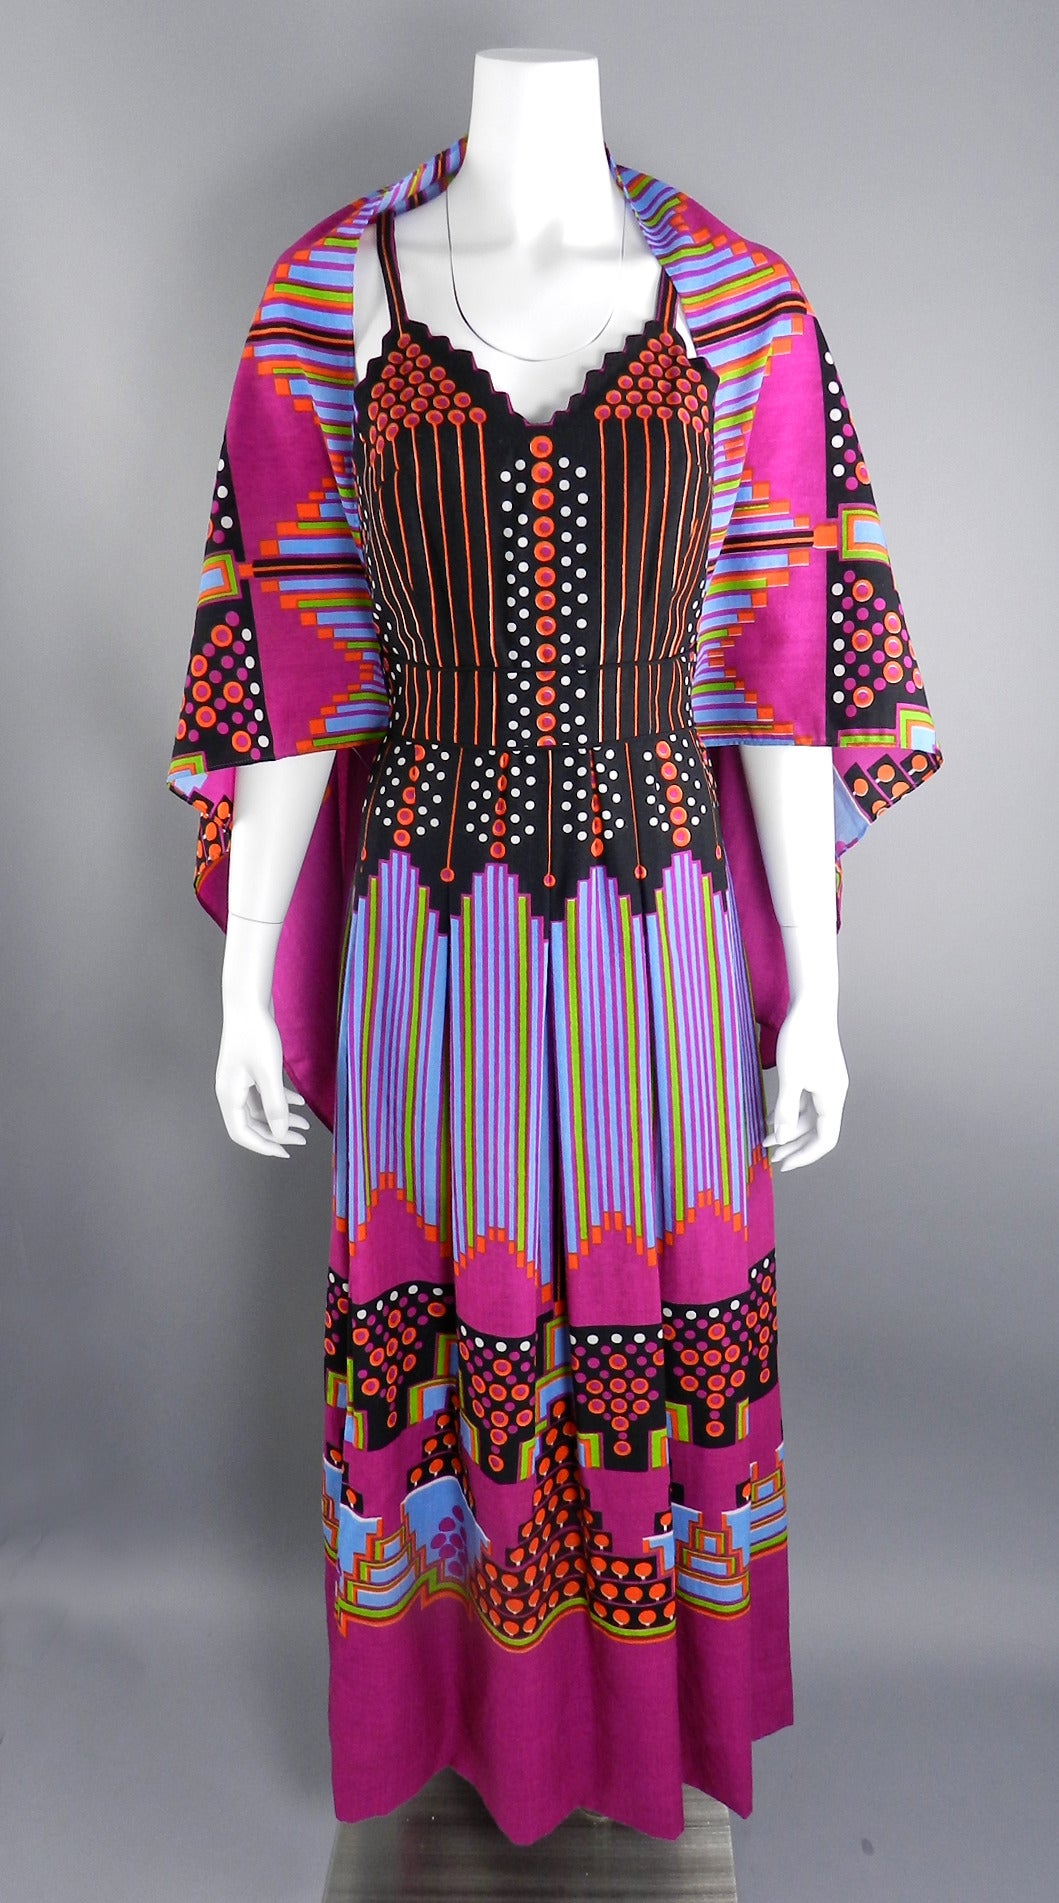 Vintage 1972 Lanvin black label dress with bold graphic pattern. The neckline is scalloped and the back covered buttons line up with the circular pattern. Matching shawl. Excellent clean condition. Tagged size vintage 12 (about a modern USA 8). Bust